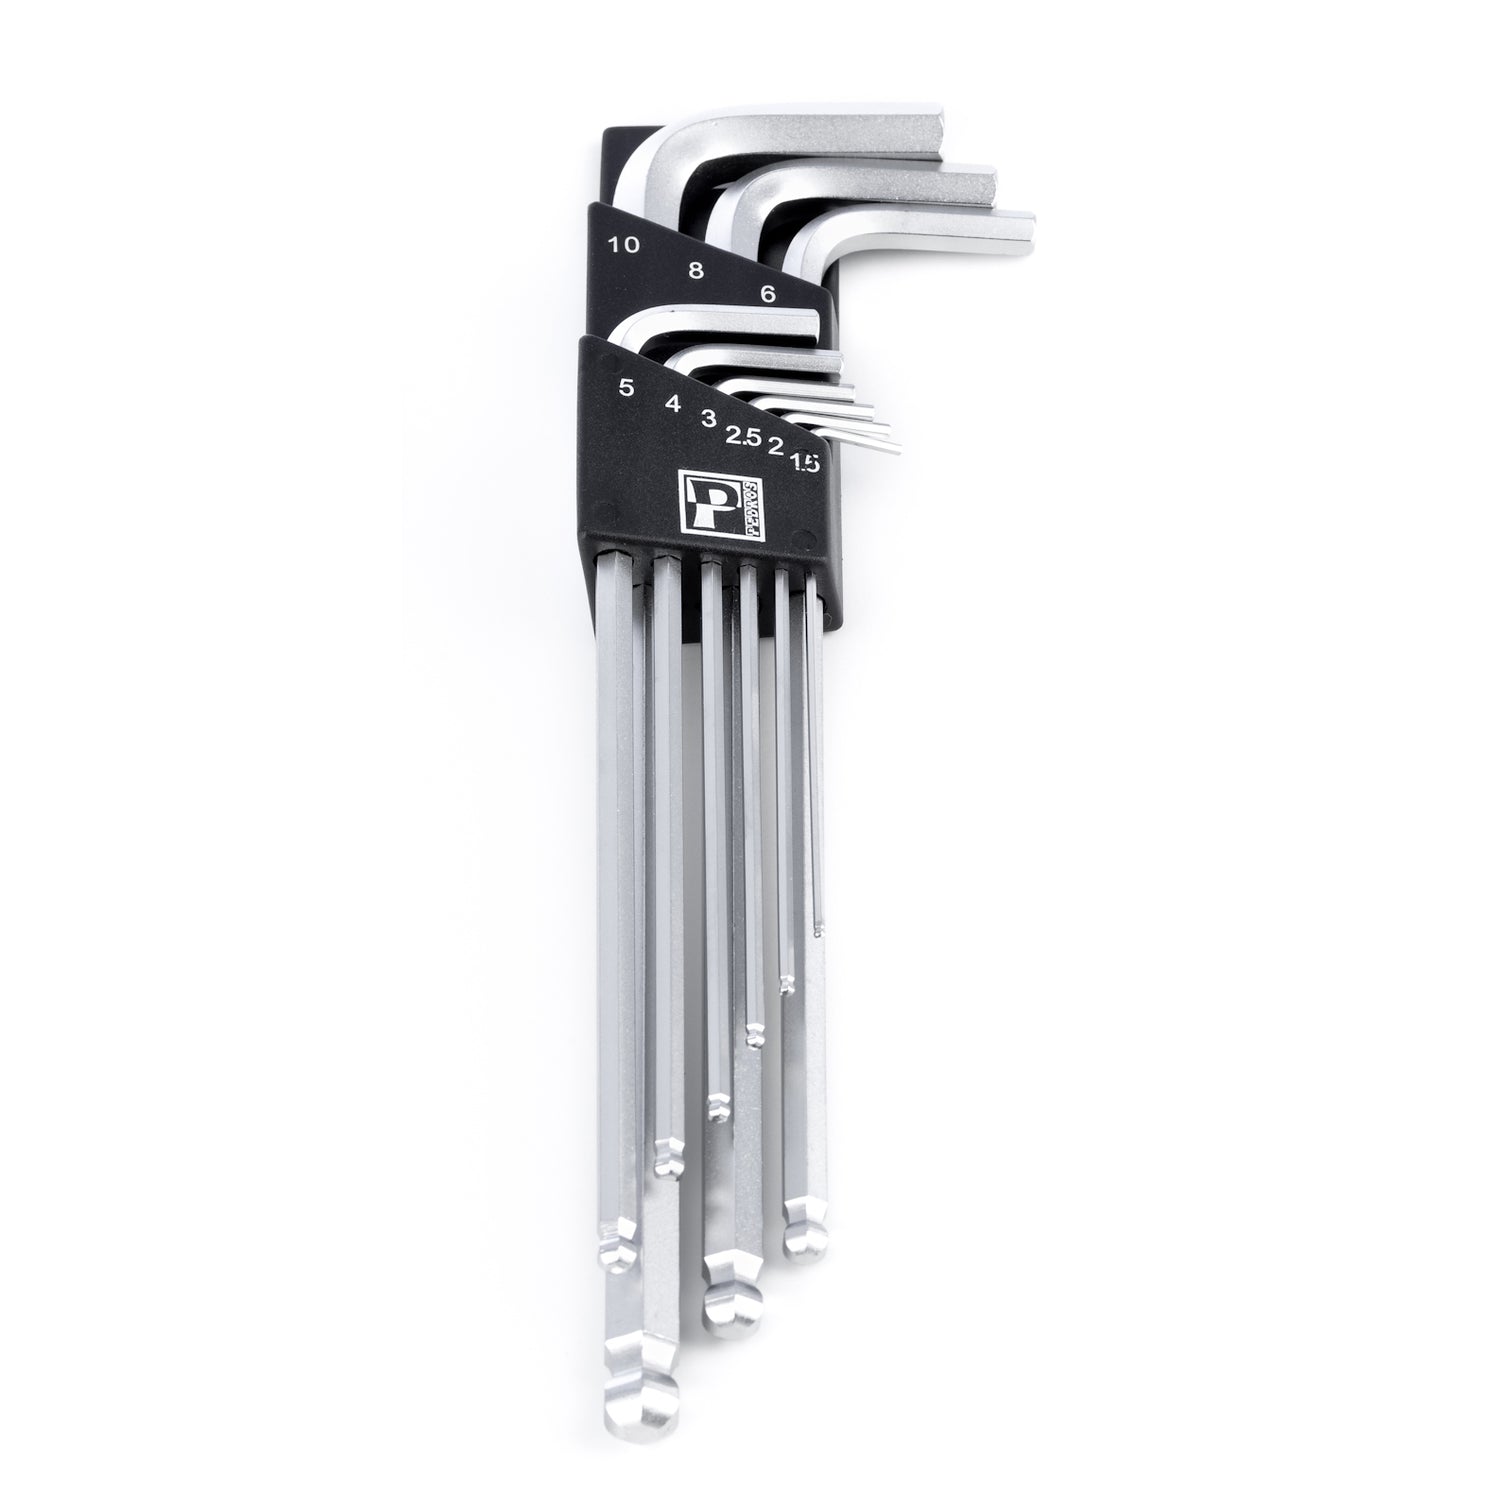 Pedro's L Hex Wrench Set 9-Piece